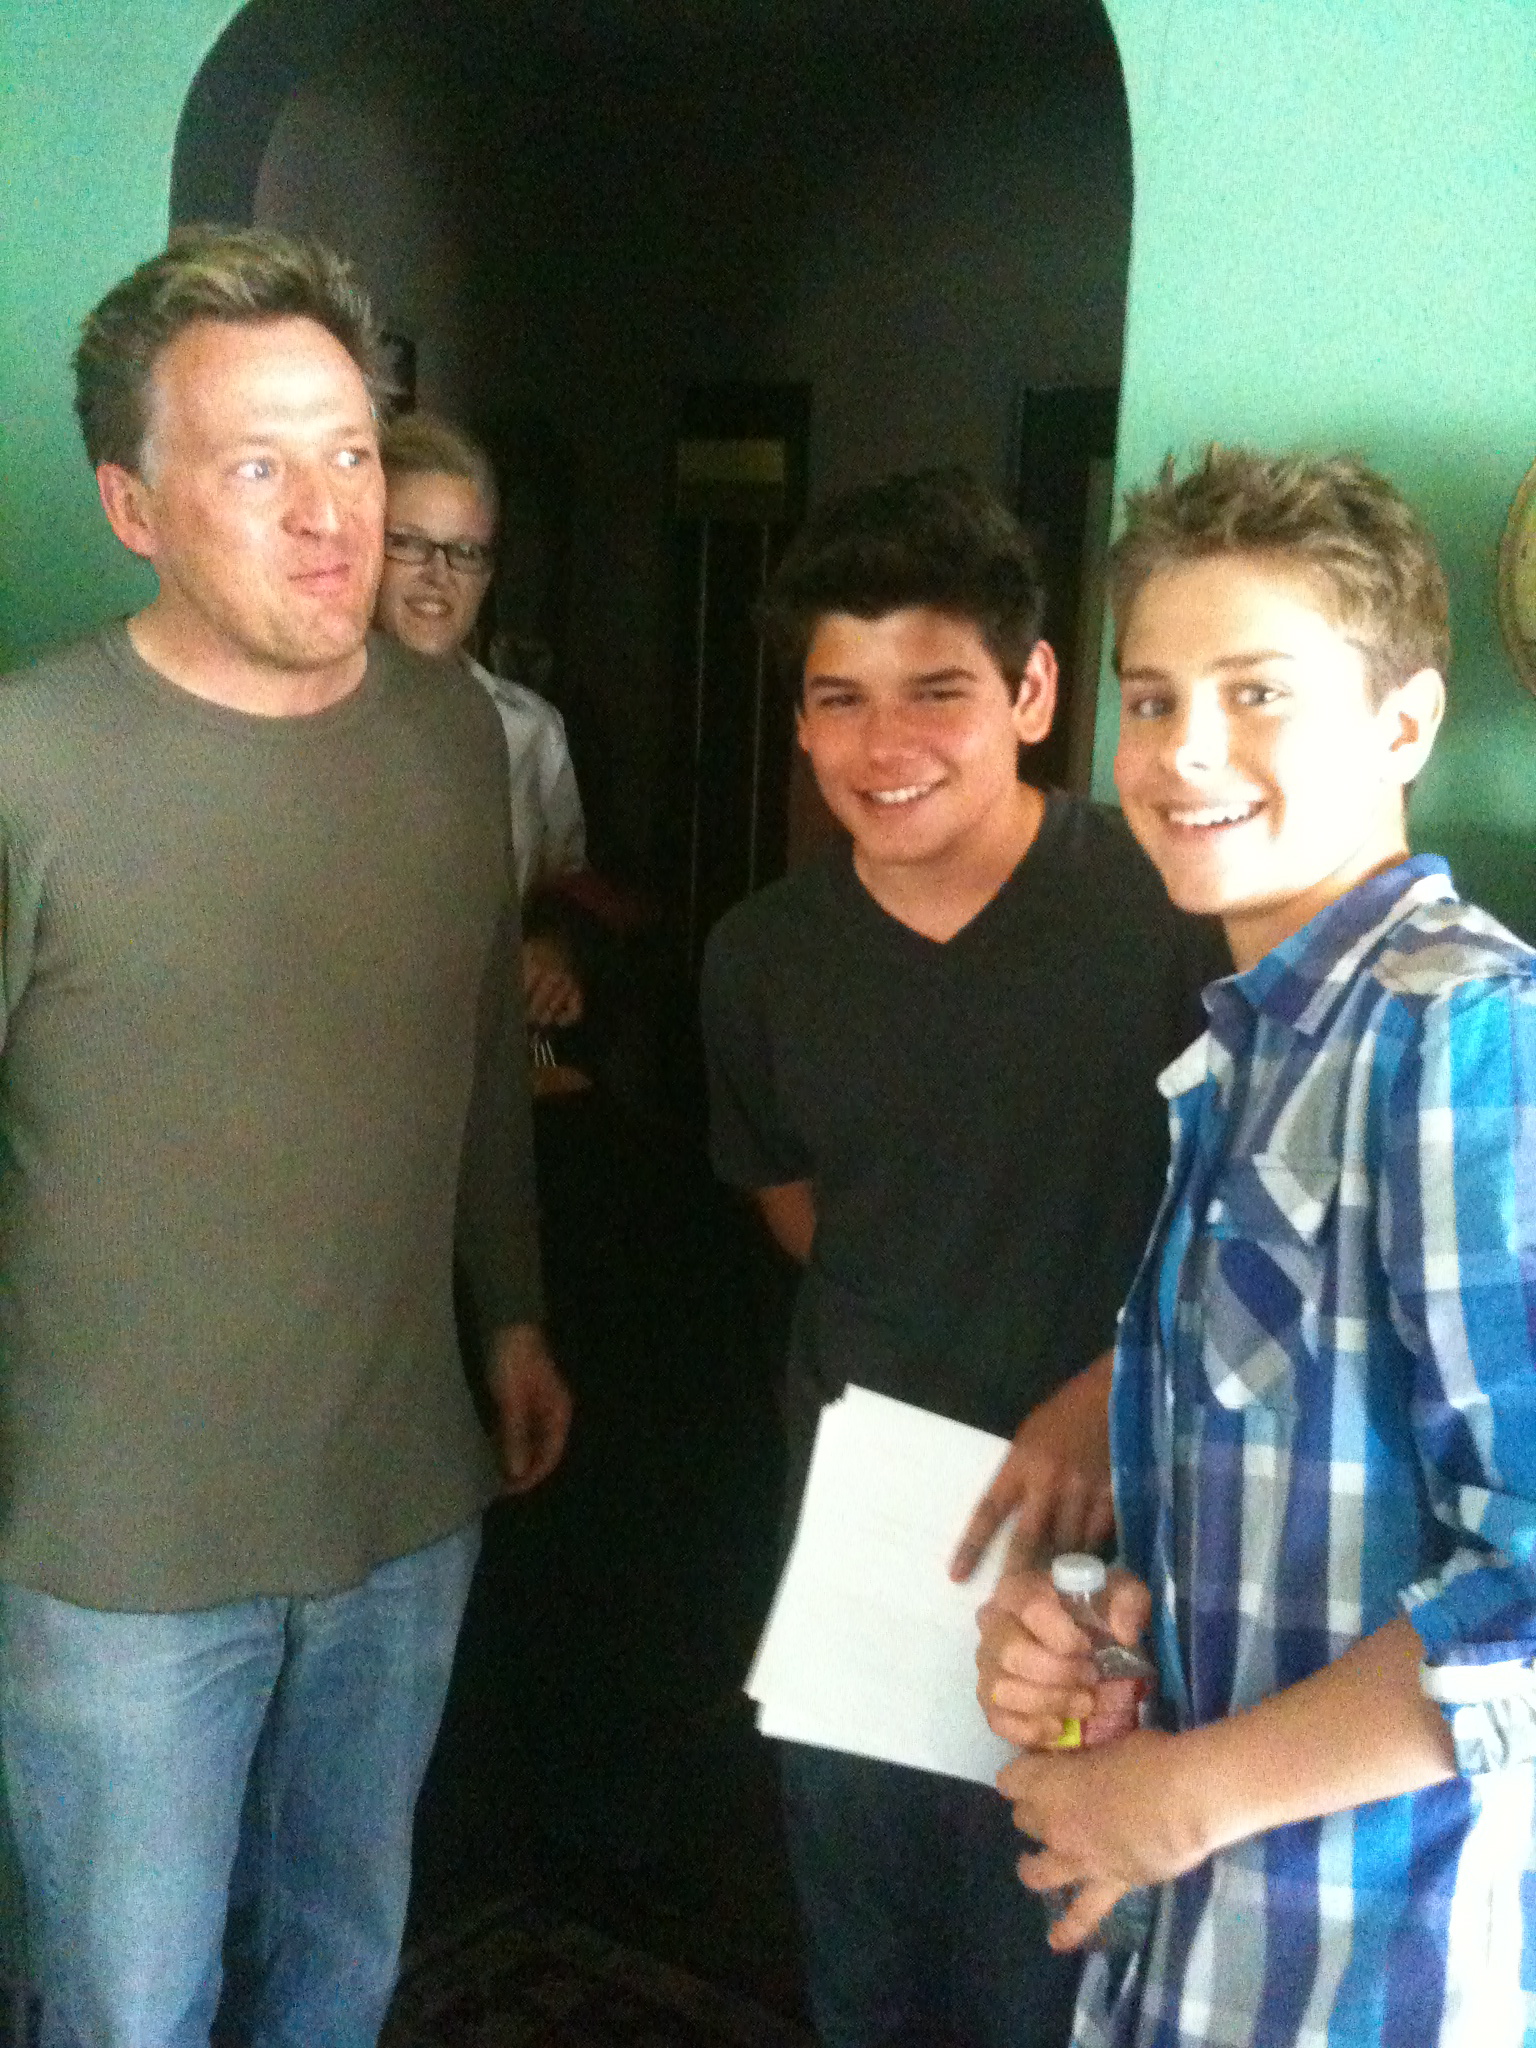 Taping of Chadley Bales, Garrett Backstrom with Director Joe Toppe and cast member George Fraiser.